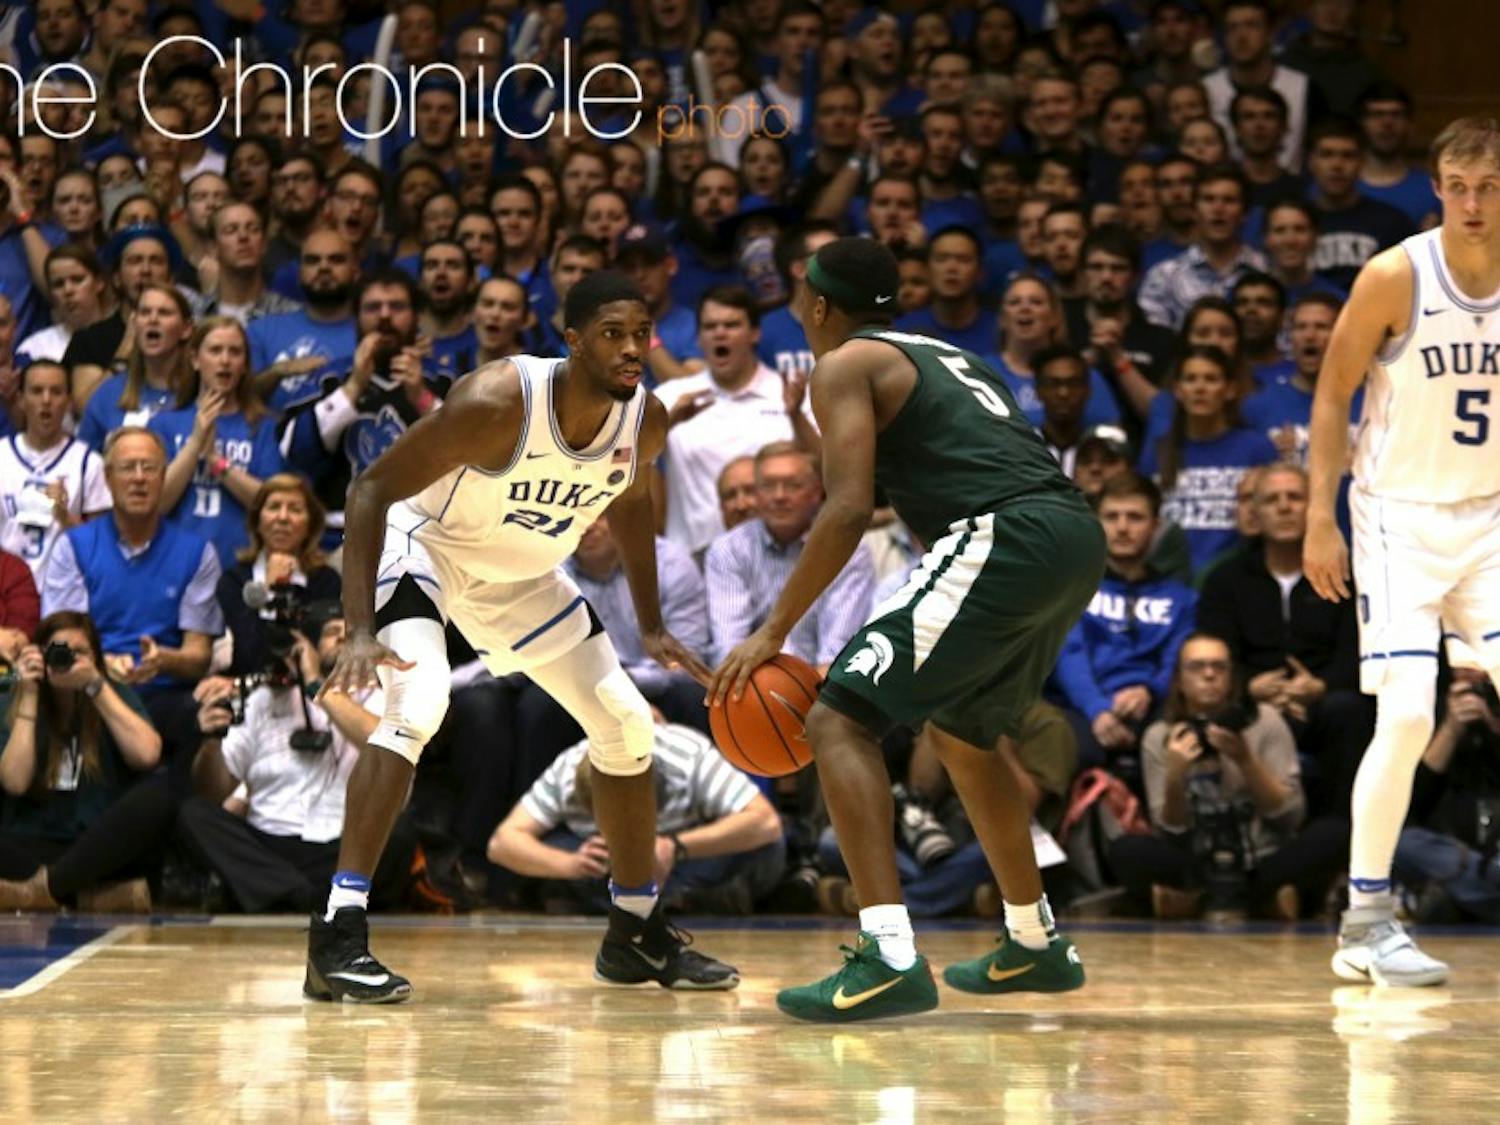 Amile Jefferson has been able to stay out of foul trouble to anchor a shorthanded frontcourt on defense.